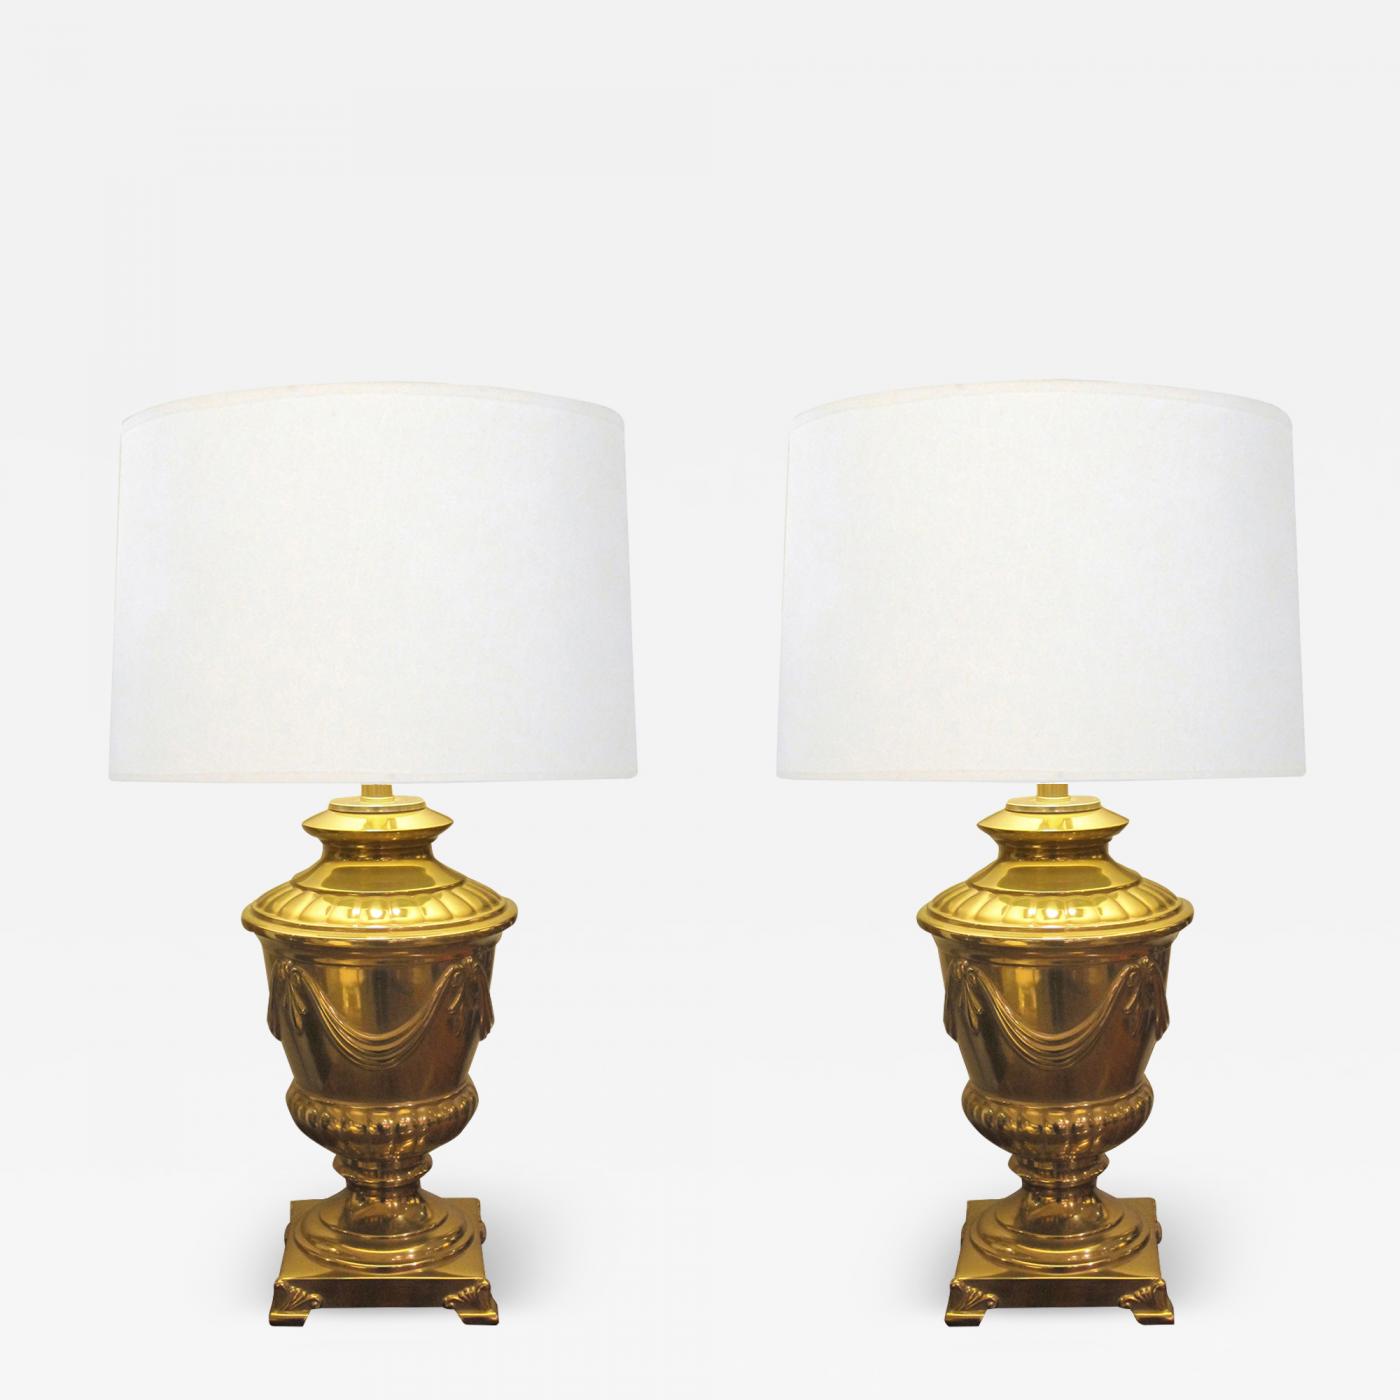 https://cdn.incollect.com/sites/default/files/zoom/Frederick-Cooper-Lamp-Co-A-Good-Quality-Pair-of-1960s-Frederick-Cooper-Campagna-form-Solid-Brass-Lamps-663163-3231969.jpg